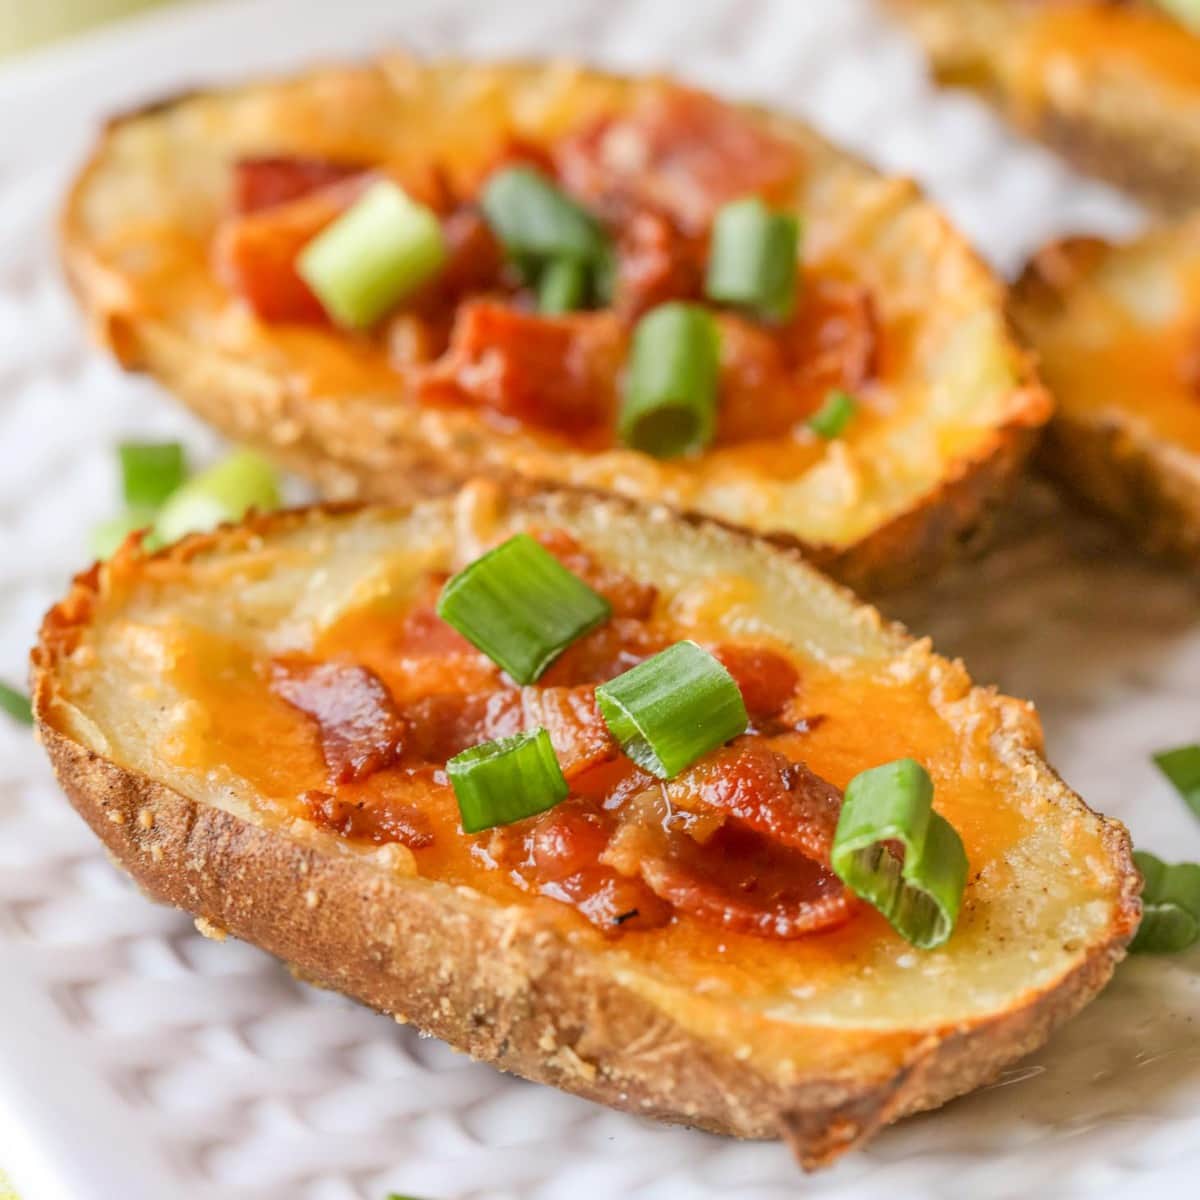 4th of July Appetizers - Parmesan crusted potato skins topped with green onions.